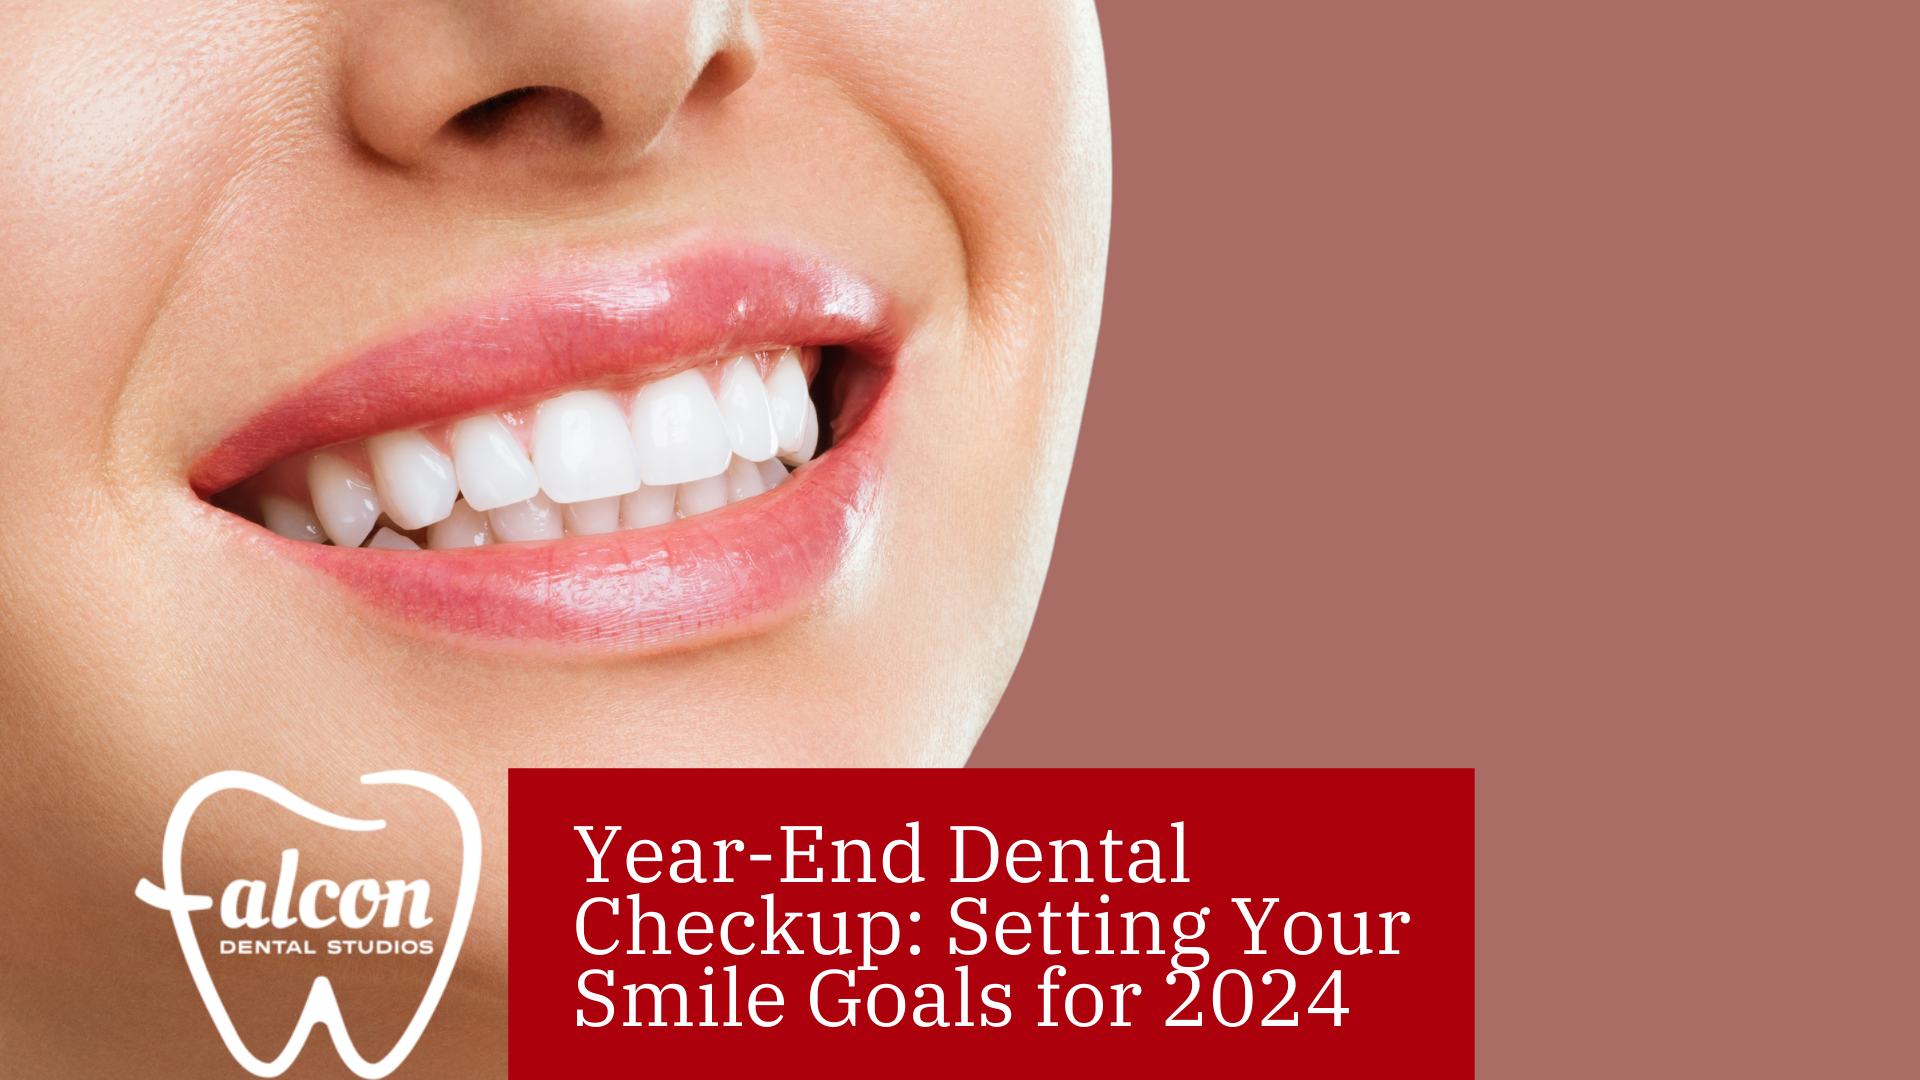 Year-End Dental Checkup: Setting Your Smile Goals for 2024